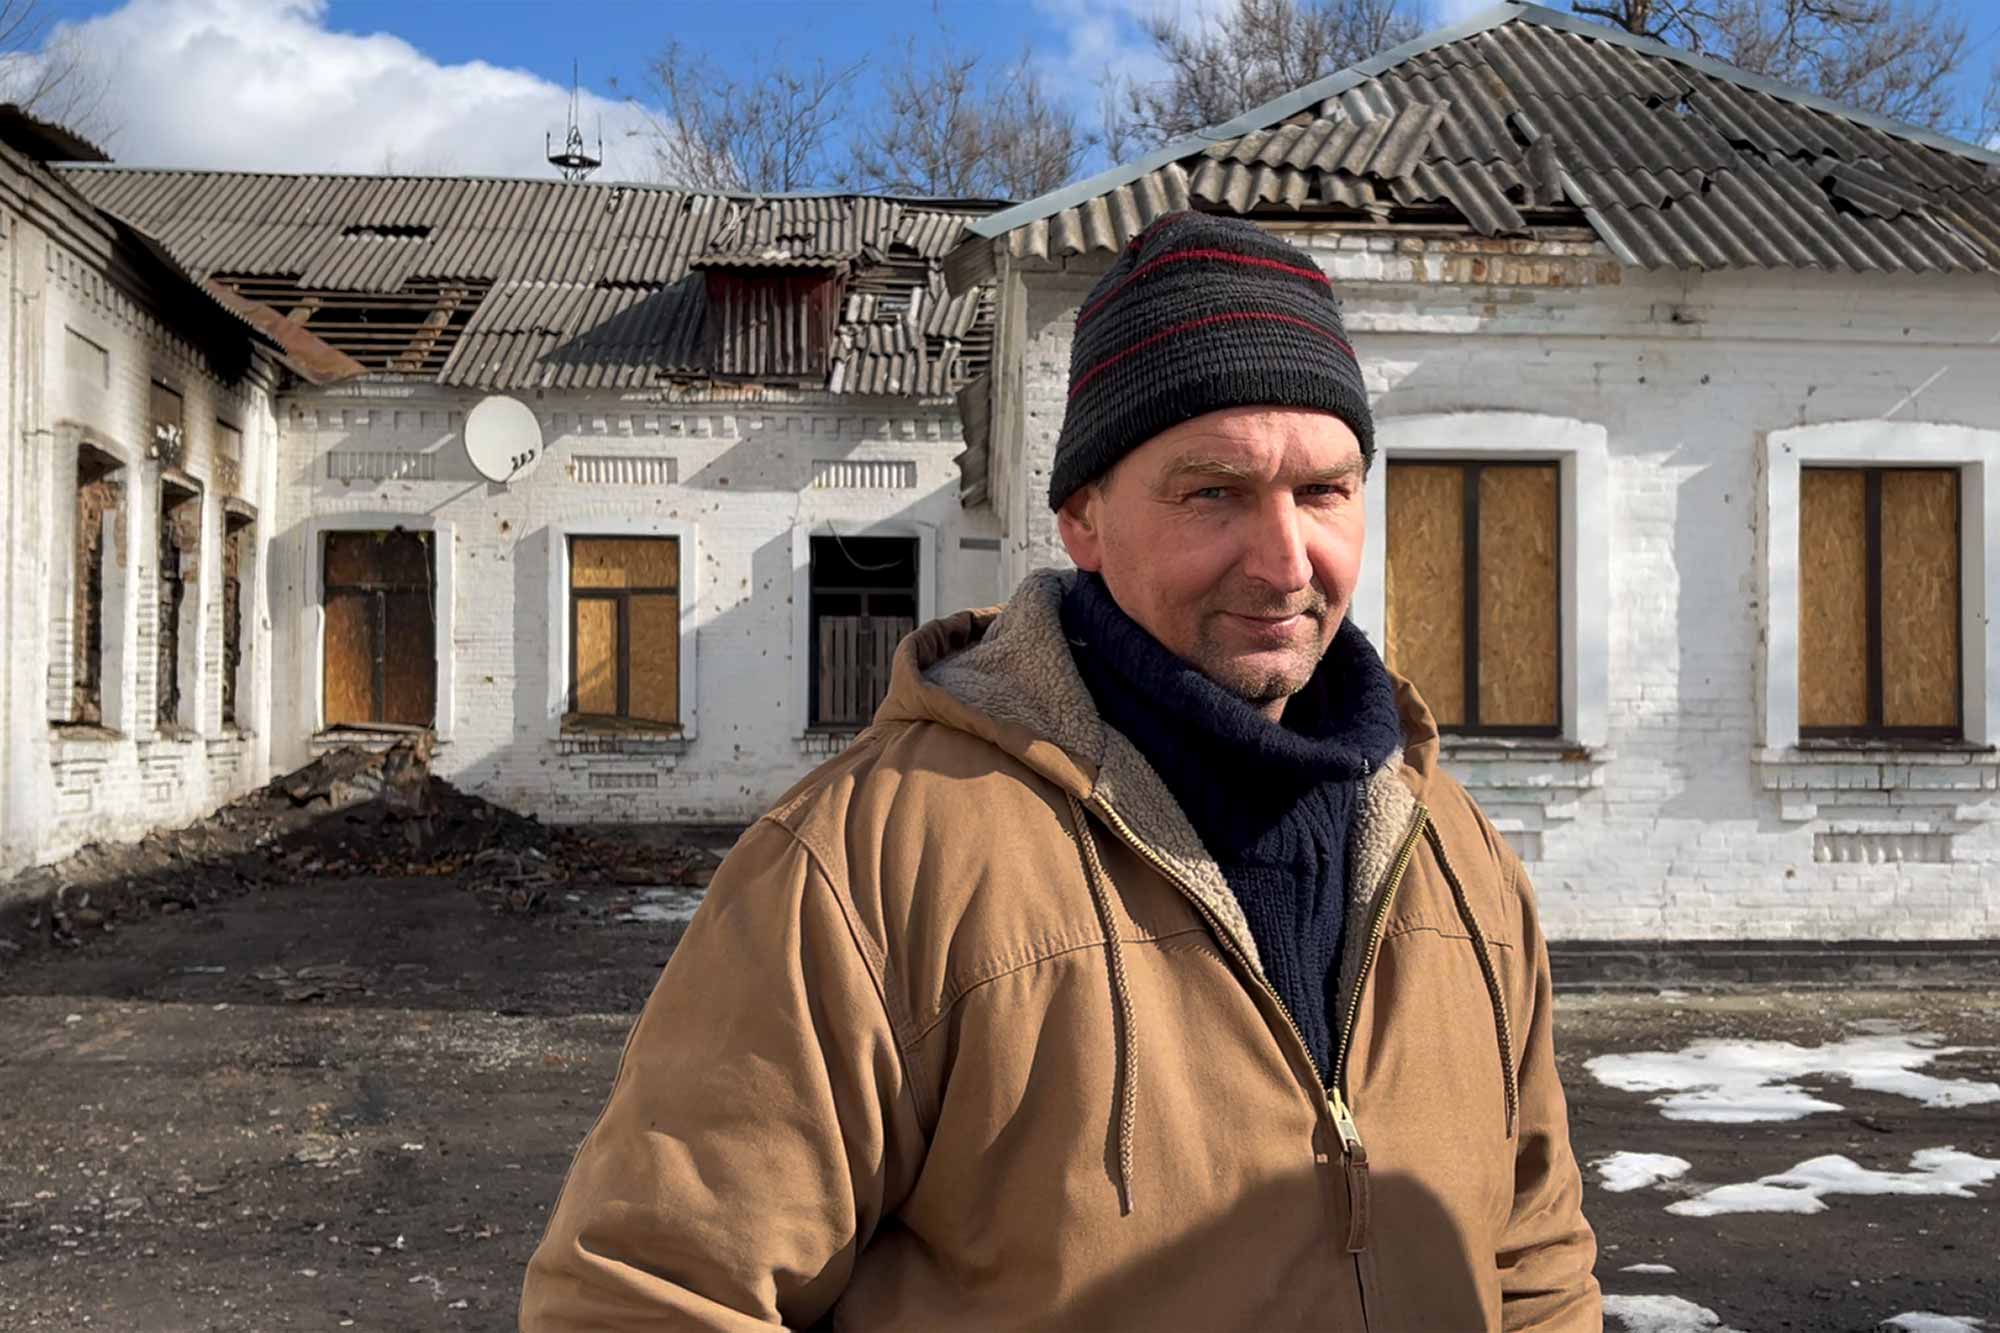 Oleksandr Piliay, Orikhiv resident living in one of the residential blocks helps distribute humanitarian aid. © IWPR